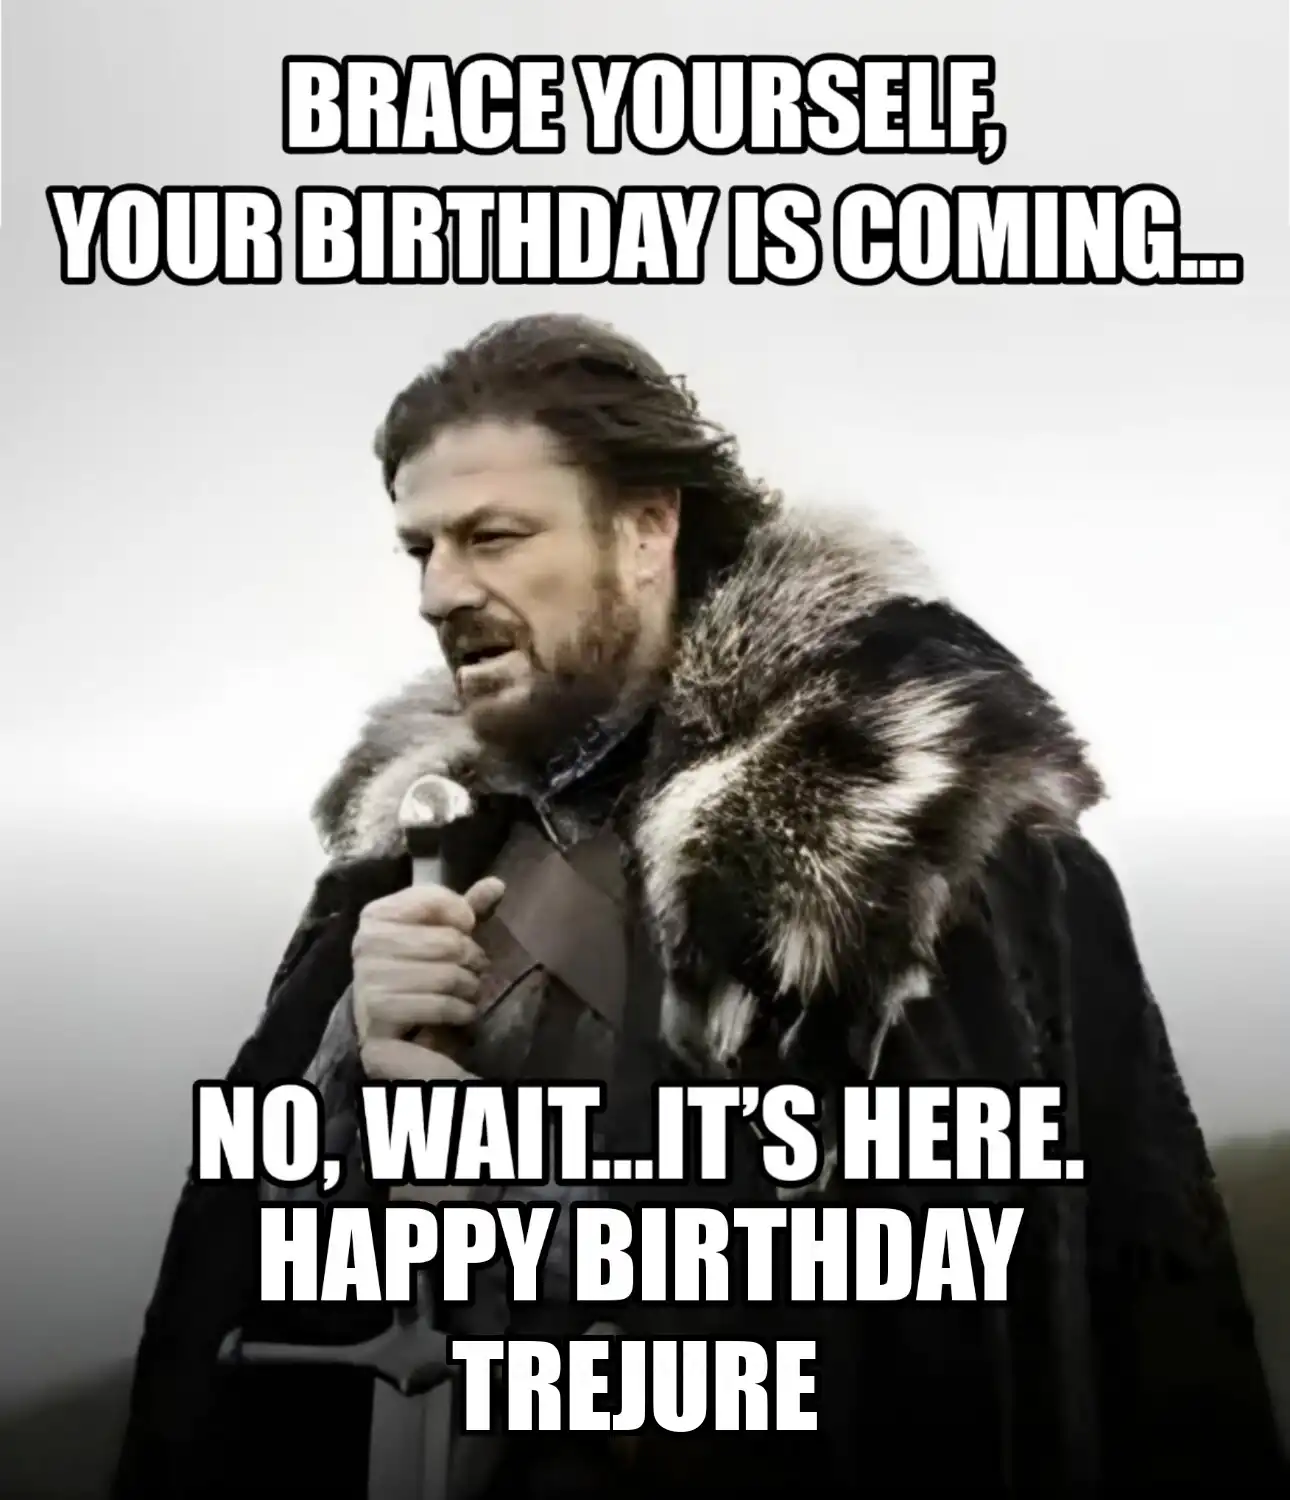 Happy Birthday Trejure Brace Yourself Your Birthday Is Coming Meme